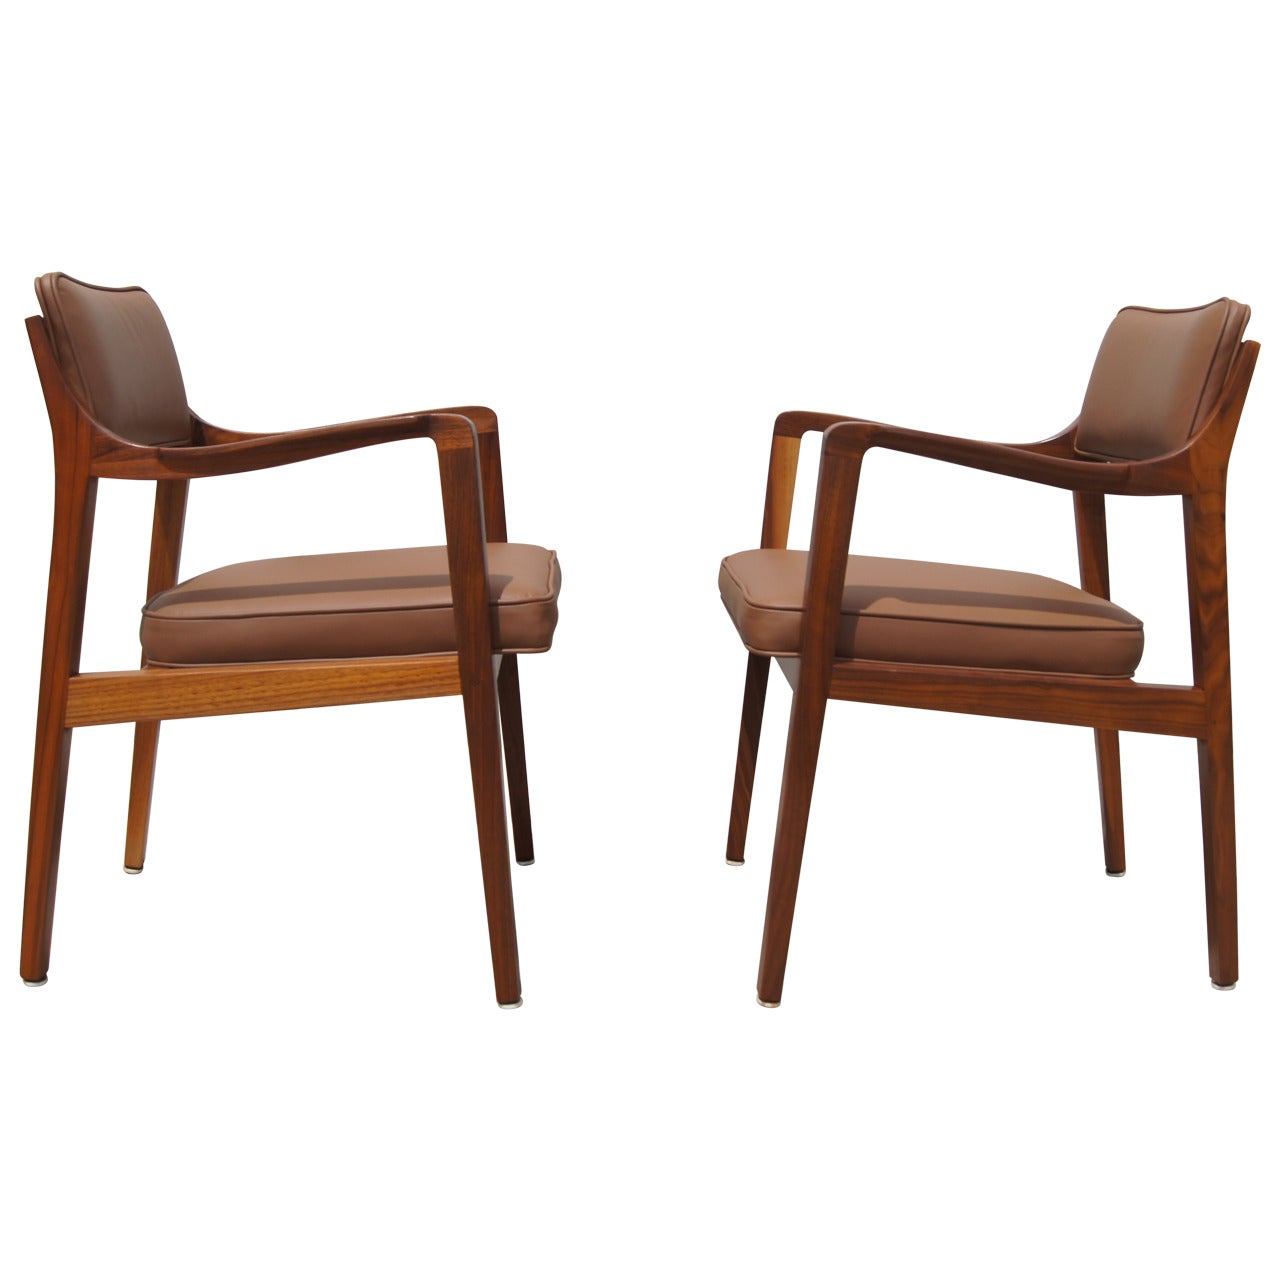 Pair of Leather and Walnut Armchairs by Edward Wormley for Dunbar